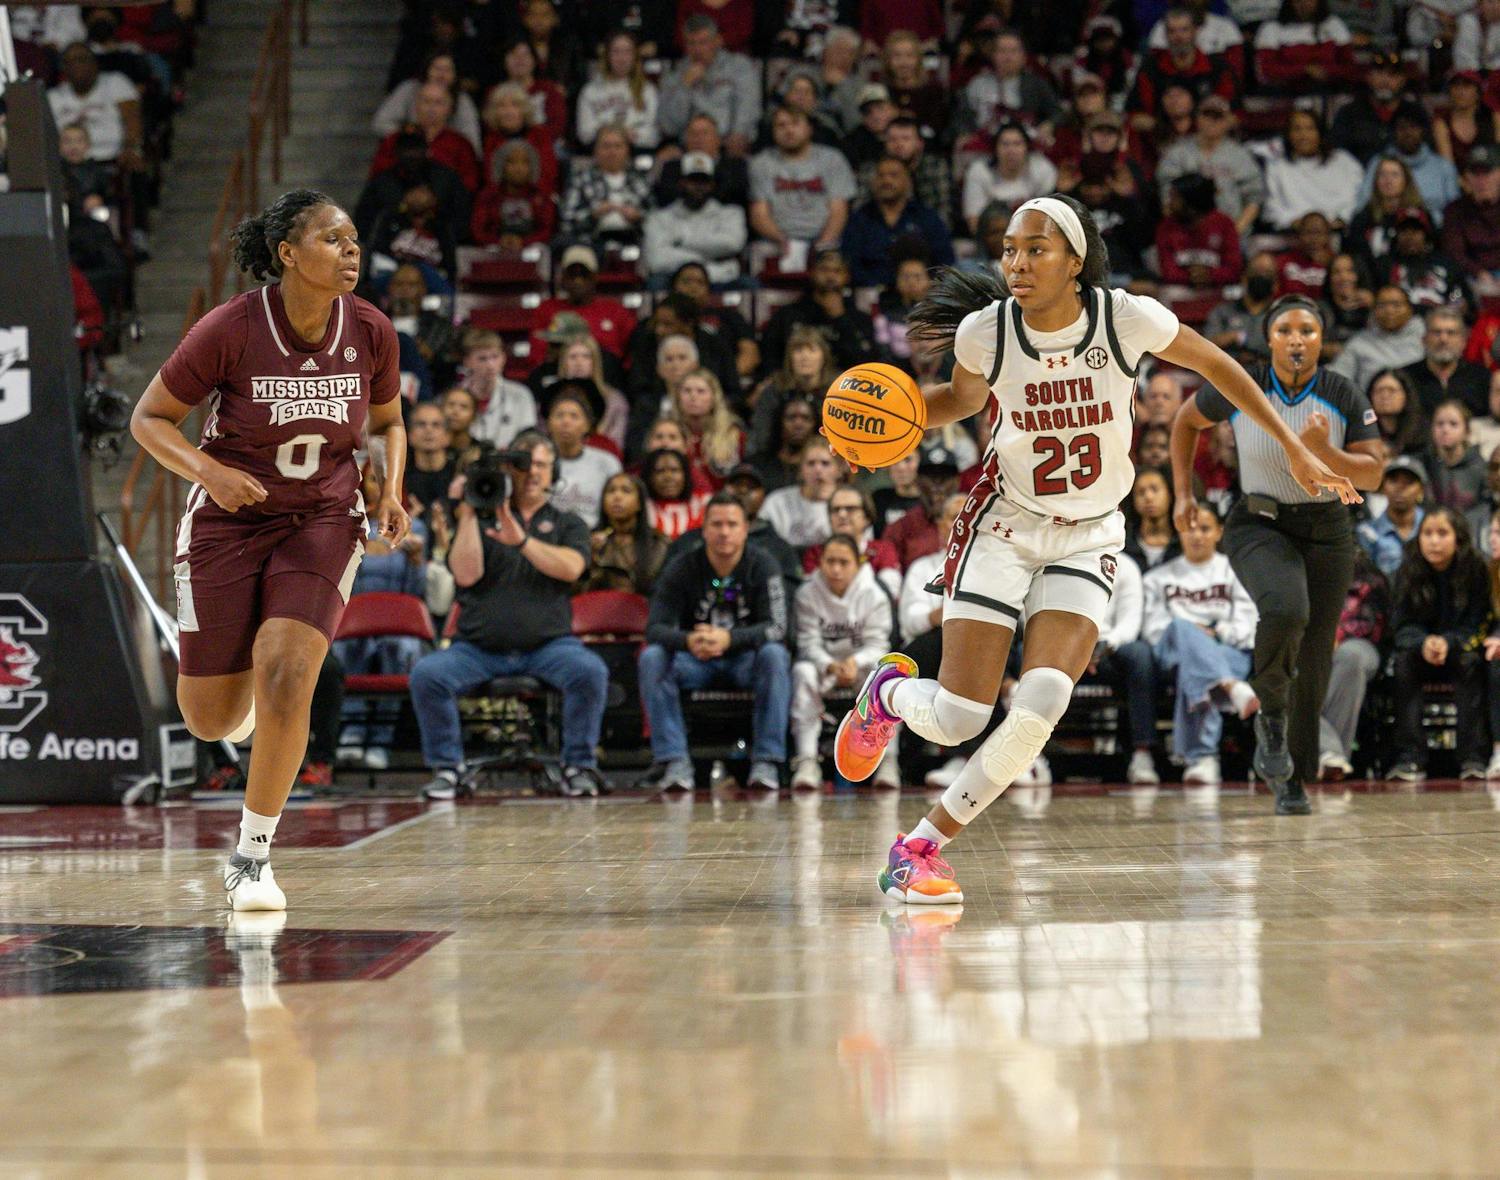 The ɫɫƵs women's basketball team locked in a win over the Mississippi State Bulldogs Sunday afternoon, holding onto its undefeated record. The team kept the lead in all four periods, ending the Jan. 7 match with a score of 89-66. Bree Hall scored 15 points, helping to close an uncomfortably close margin in the third quarter with assistance during the rest of the game from Kamilla Cardoso, who scored 13 points. Up next, the ɫɫƵs are scheduled to face Missouri Thursday on the road.